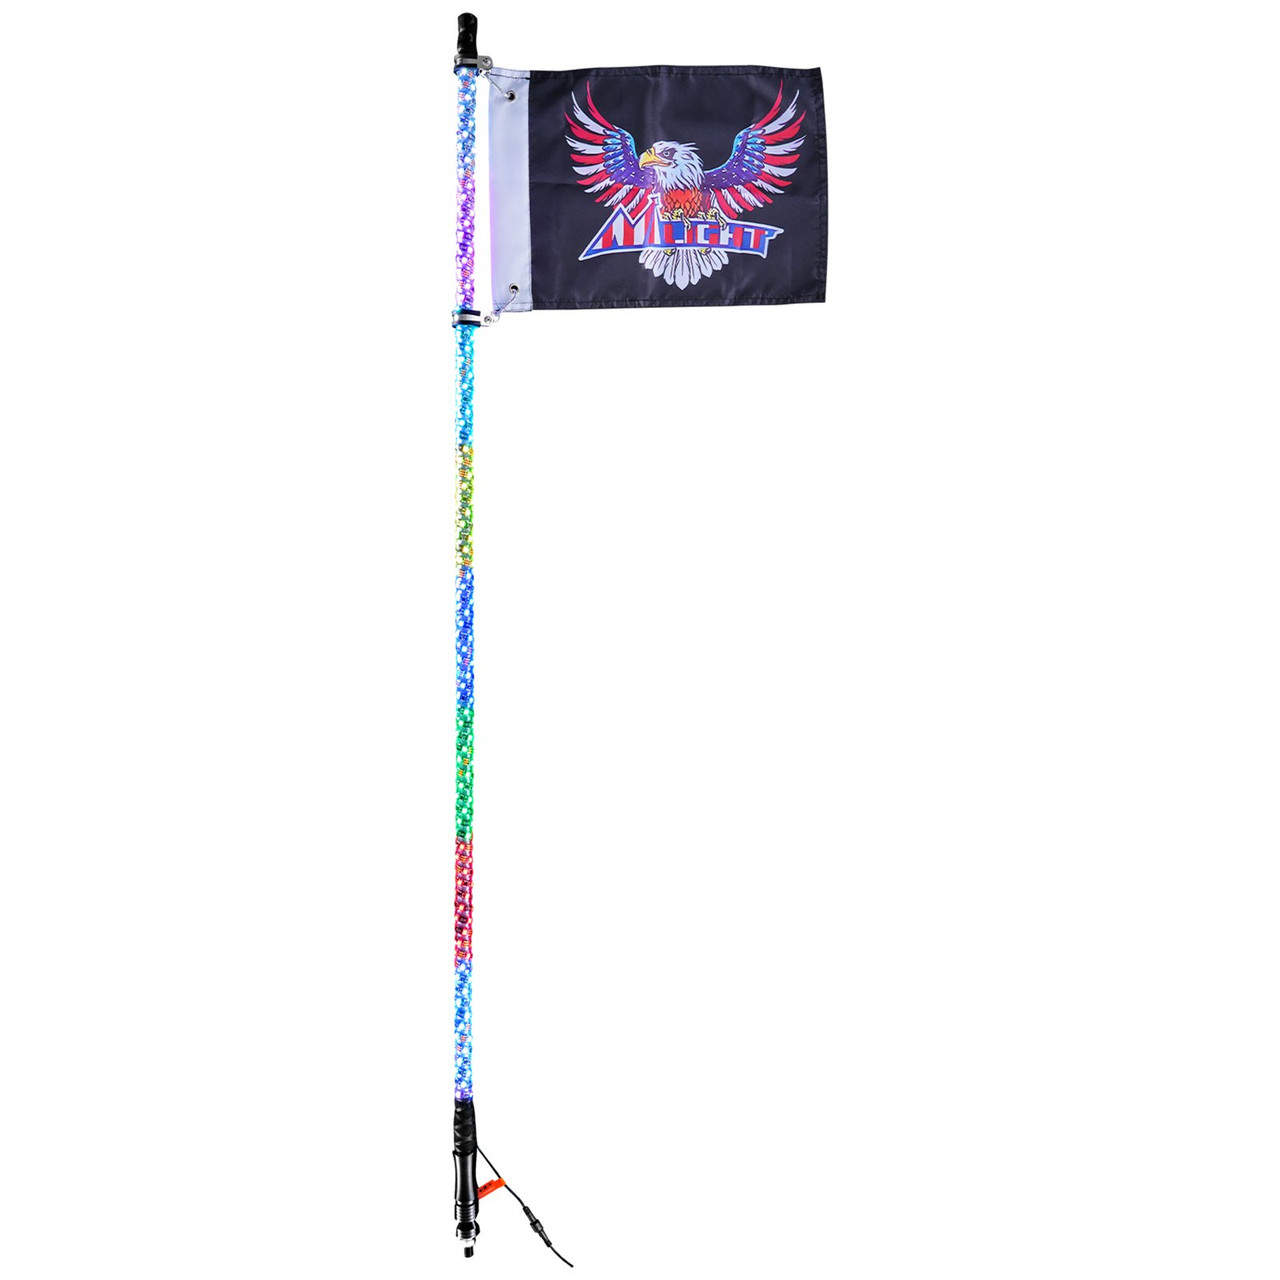 VEVOR 1 PC 4 FT Whip Light, APP & RF Remote Control Led Whip Light, Waterproof 360° Spiral RGB Chasing Lighted Whips with 2 Flags, for UTVs, ATVs, Motorcycles, RZR, Can-am, Trucks, Off-road, Go-karts